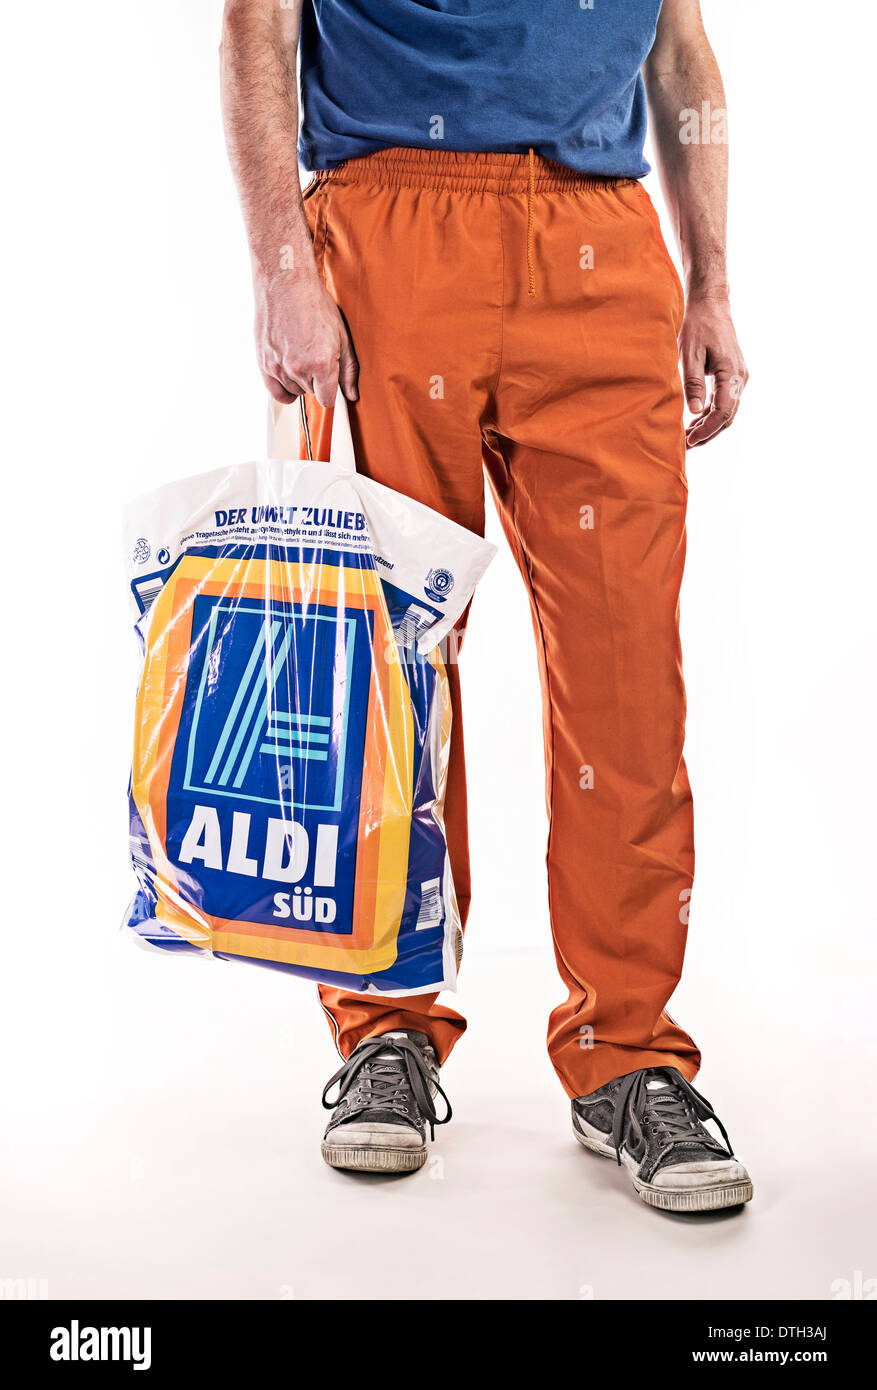 Lower body of a man with sweatpants, carrying a plastic bag of food discounter Aldi. Stock Photo